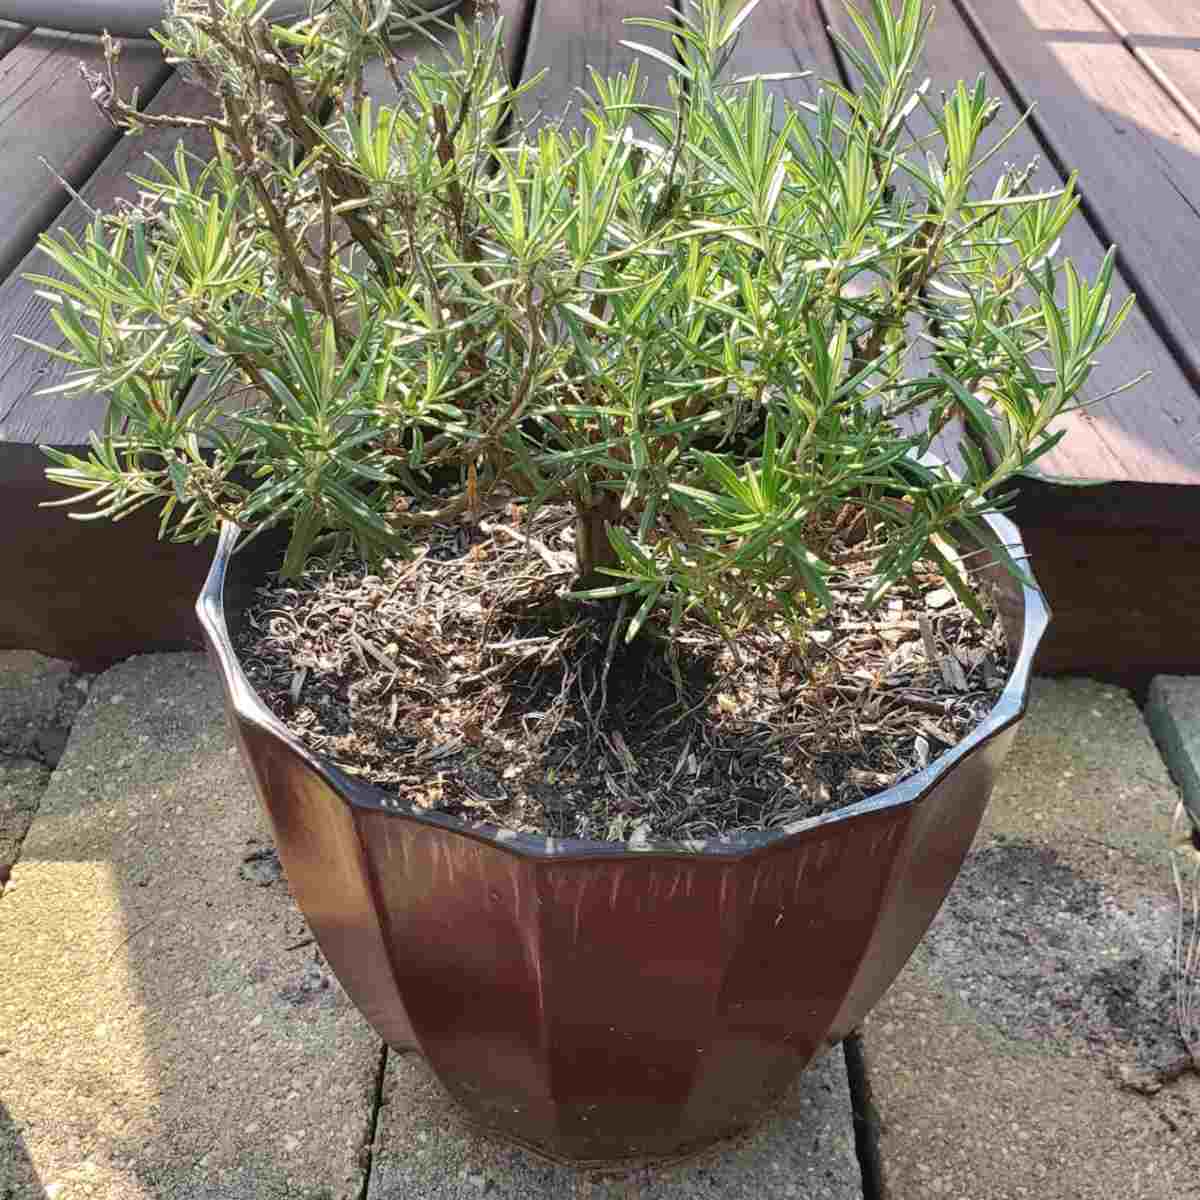 Rosemary plant in a large brown pot.